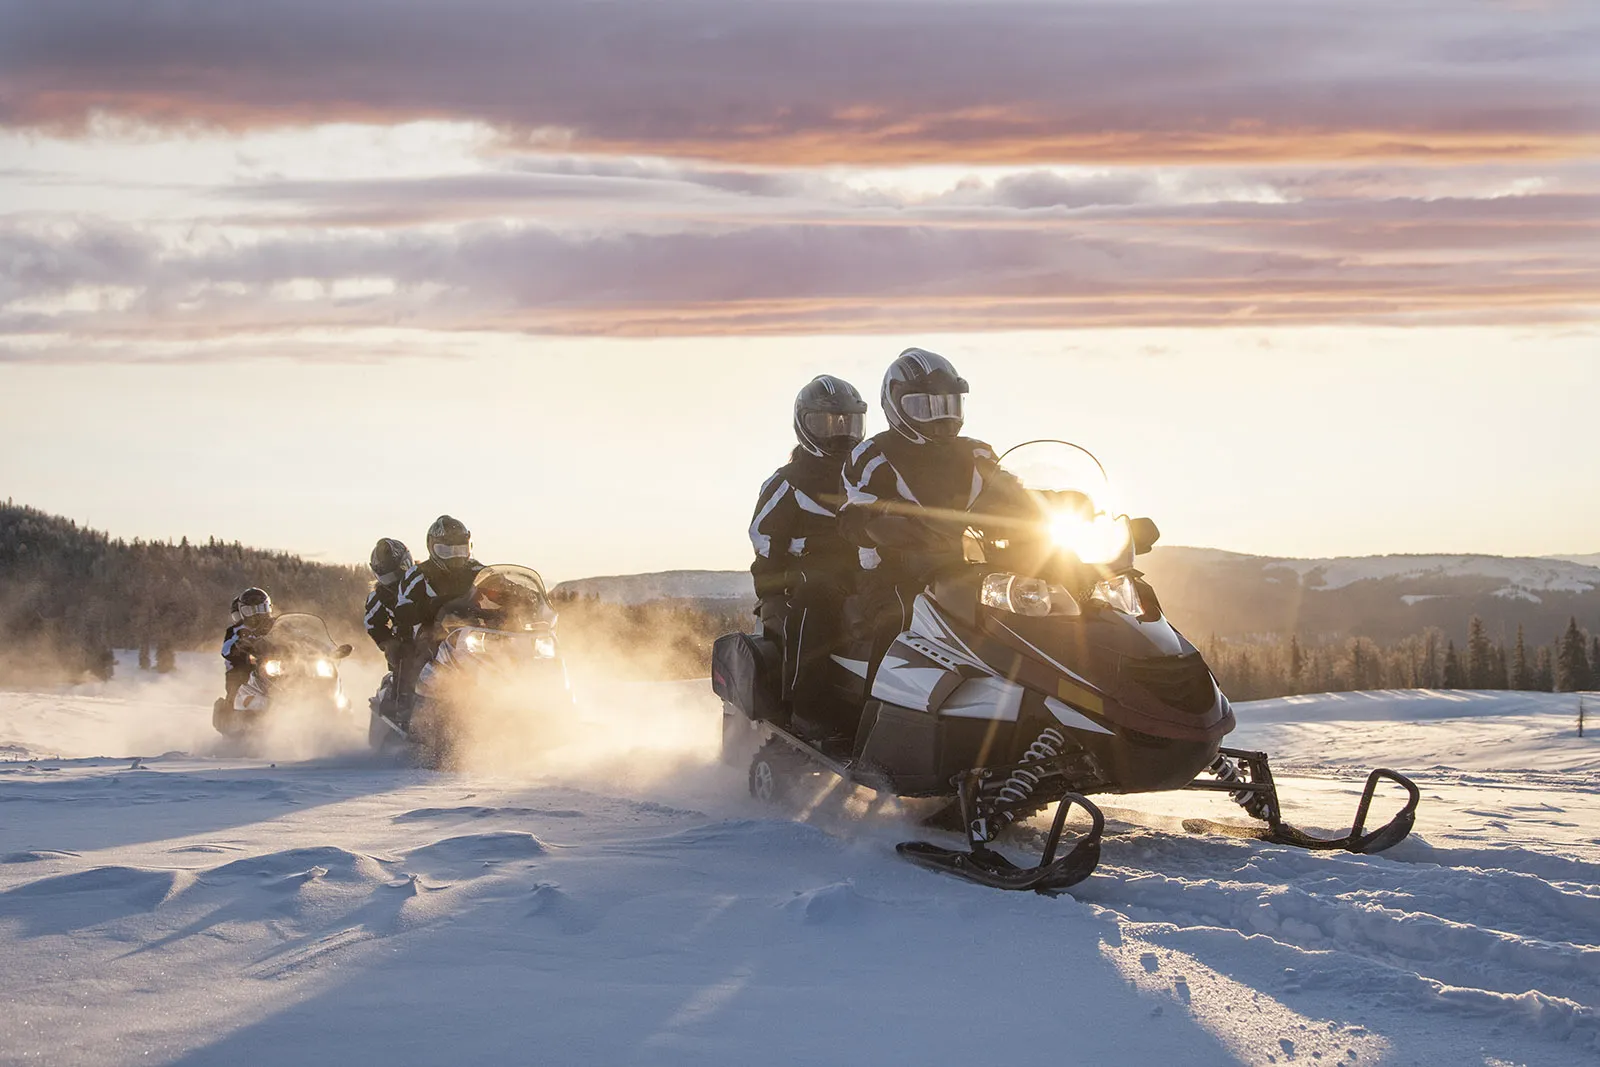 Snowmobiles plowing through the snow at sunset in Swedish Lapland